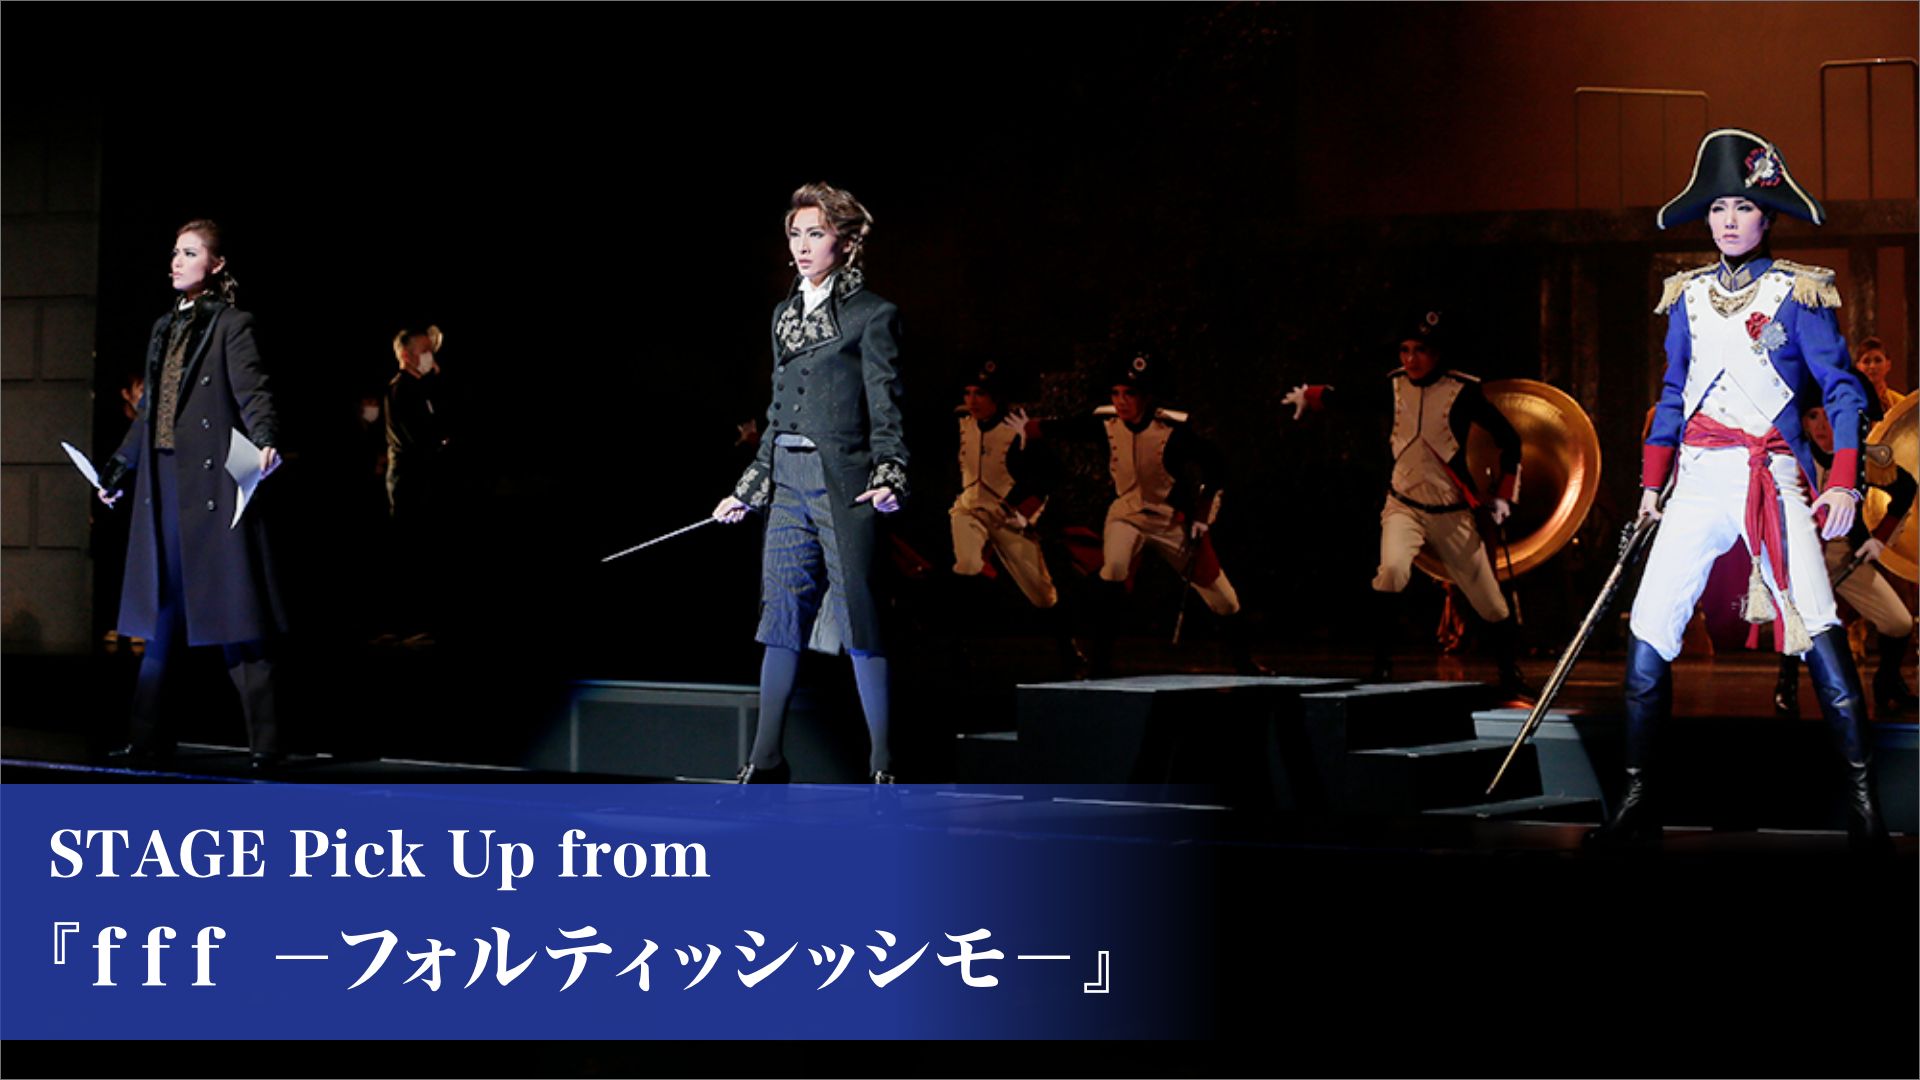 STAGE Pick Up from 『f f f -フォルティッシッシモ-』